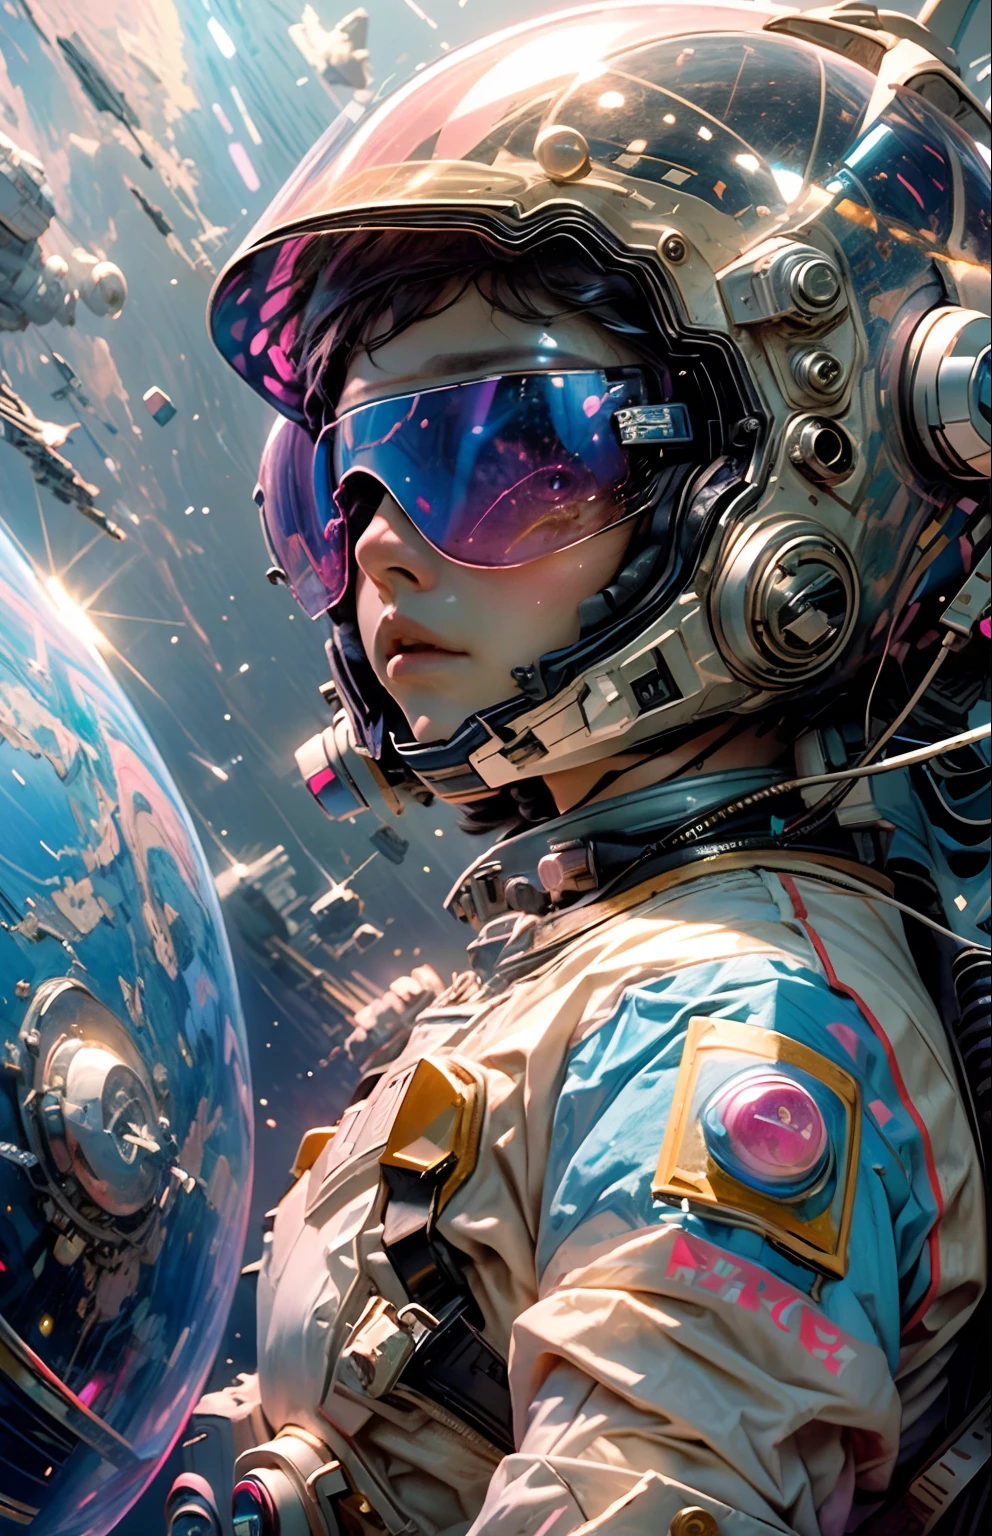 "((masterpiece)), best quality, pink, a delicate astronaut exploring a bubblegum world, light and space, a wide variety of pastel shades, All in high definition and detail, such as zero gravity, helmet visor displaying the universe, wearing black uv glasses, deep space, stars, galaxies, colorful space rocks, a lot of energy and emotion!"